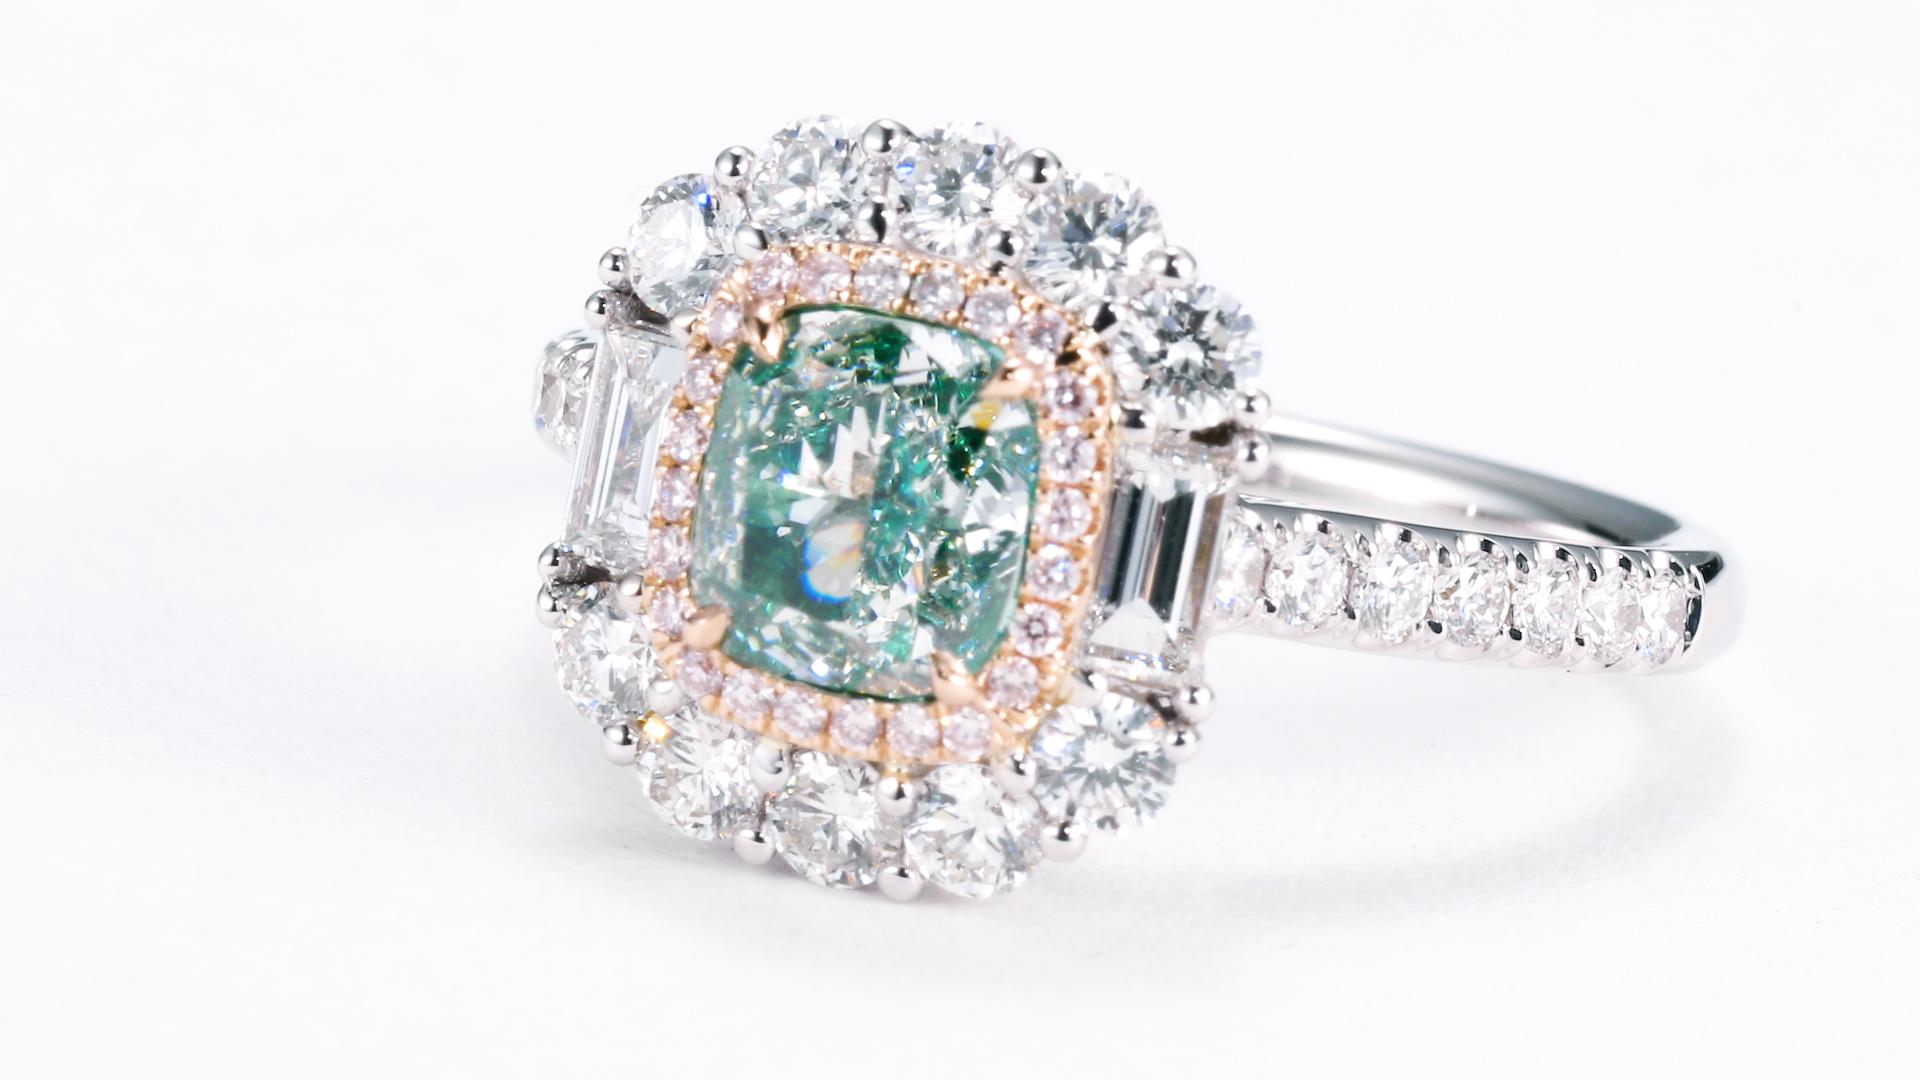 a breathtaking jewelry piece featuring a 1.02ct VS2 GIA certified natural fancy color, very light green-yellow cushion-shaped diamond. This remarkable gem is beautifully showcased on an 18kt gold setting, adorned with a captivating arrangement of